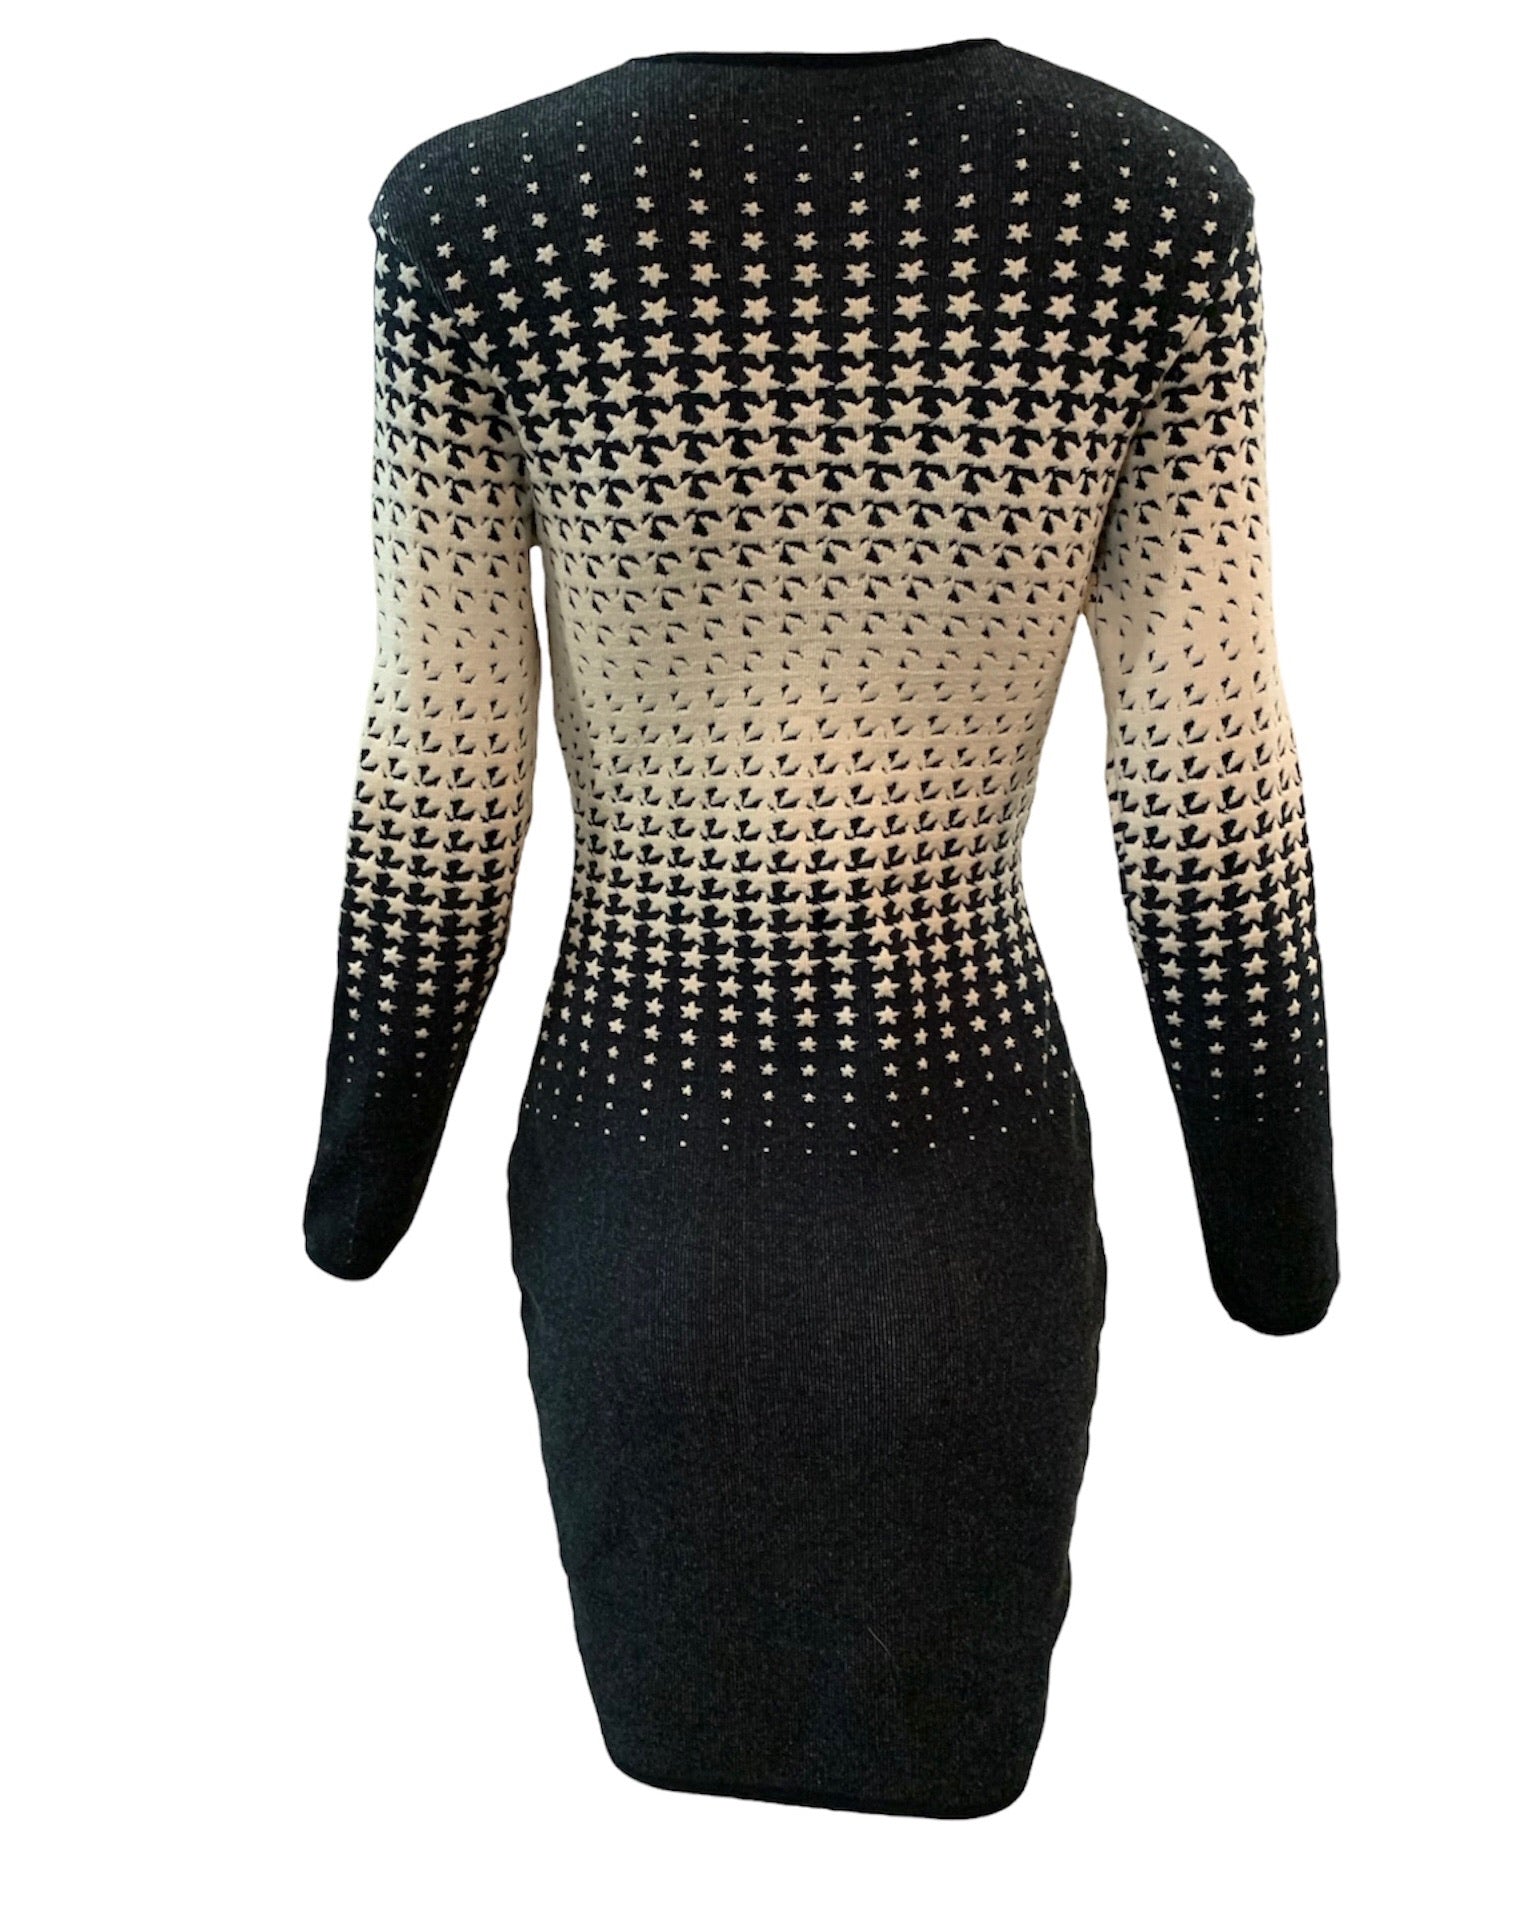  Thierry Mugler 90s Black and White Body Op Art Body Con Knit Dress BACK 3 of 5